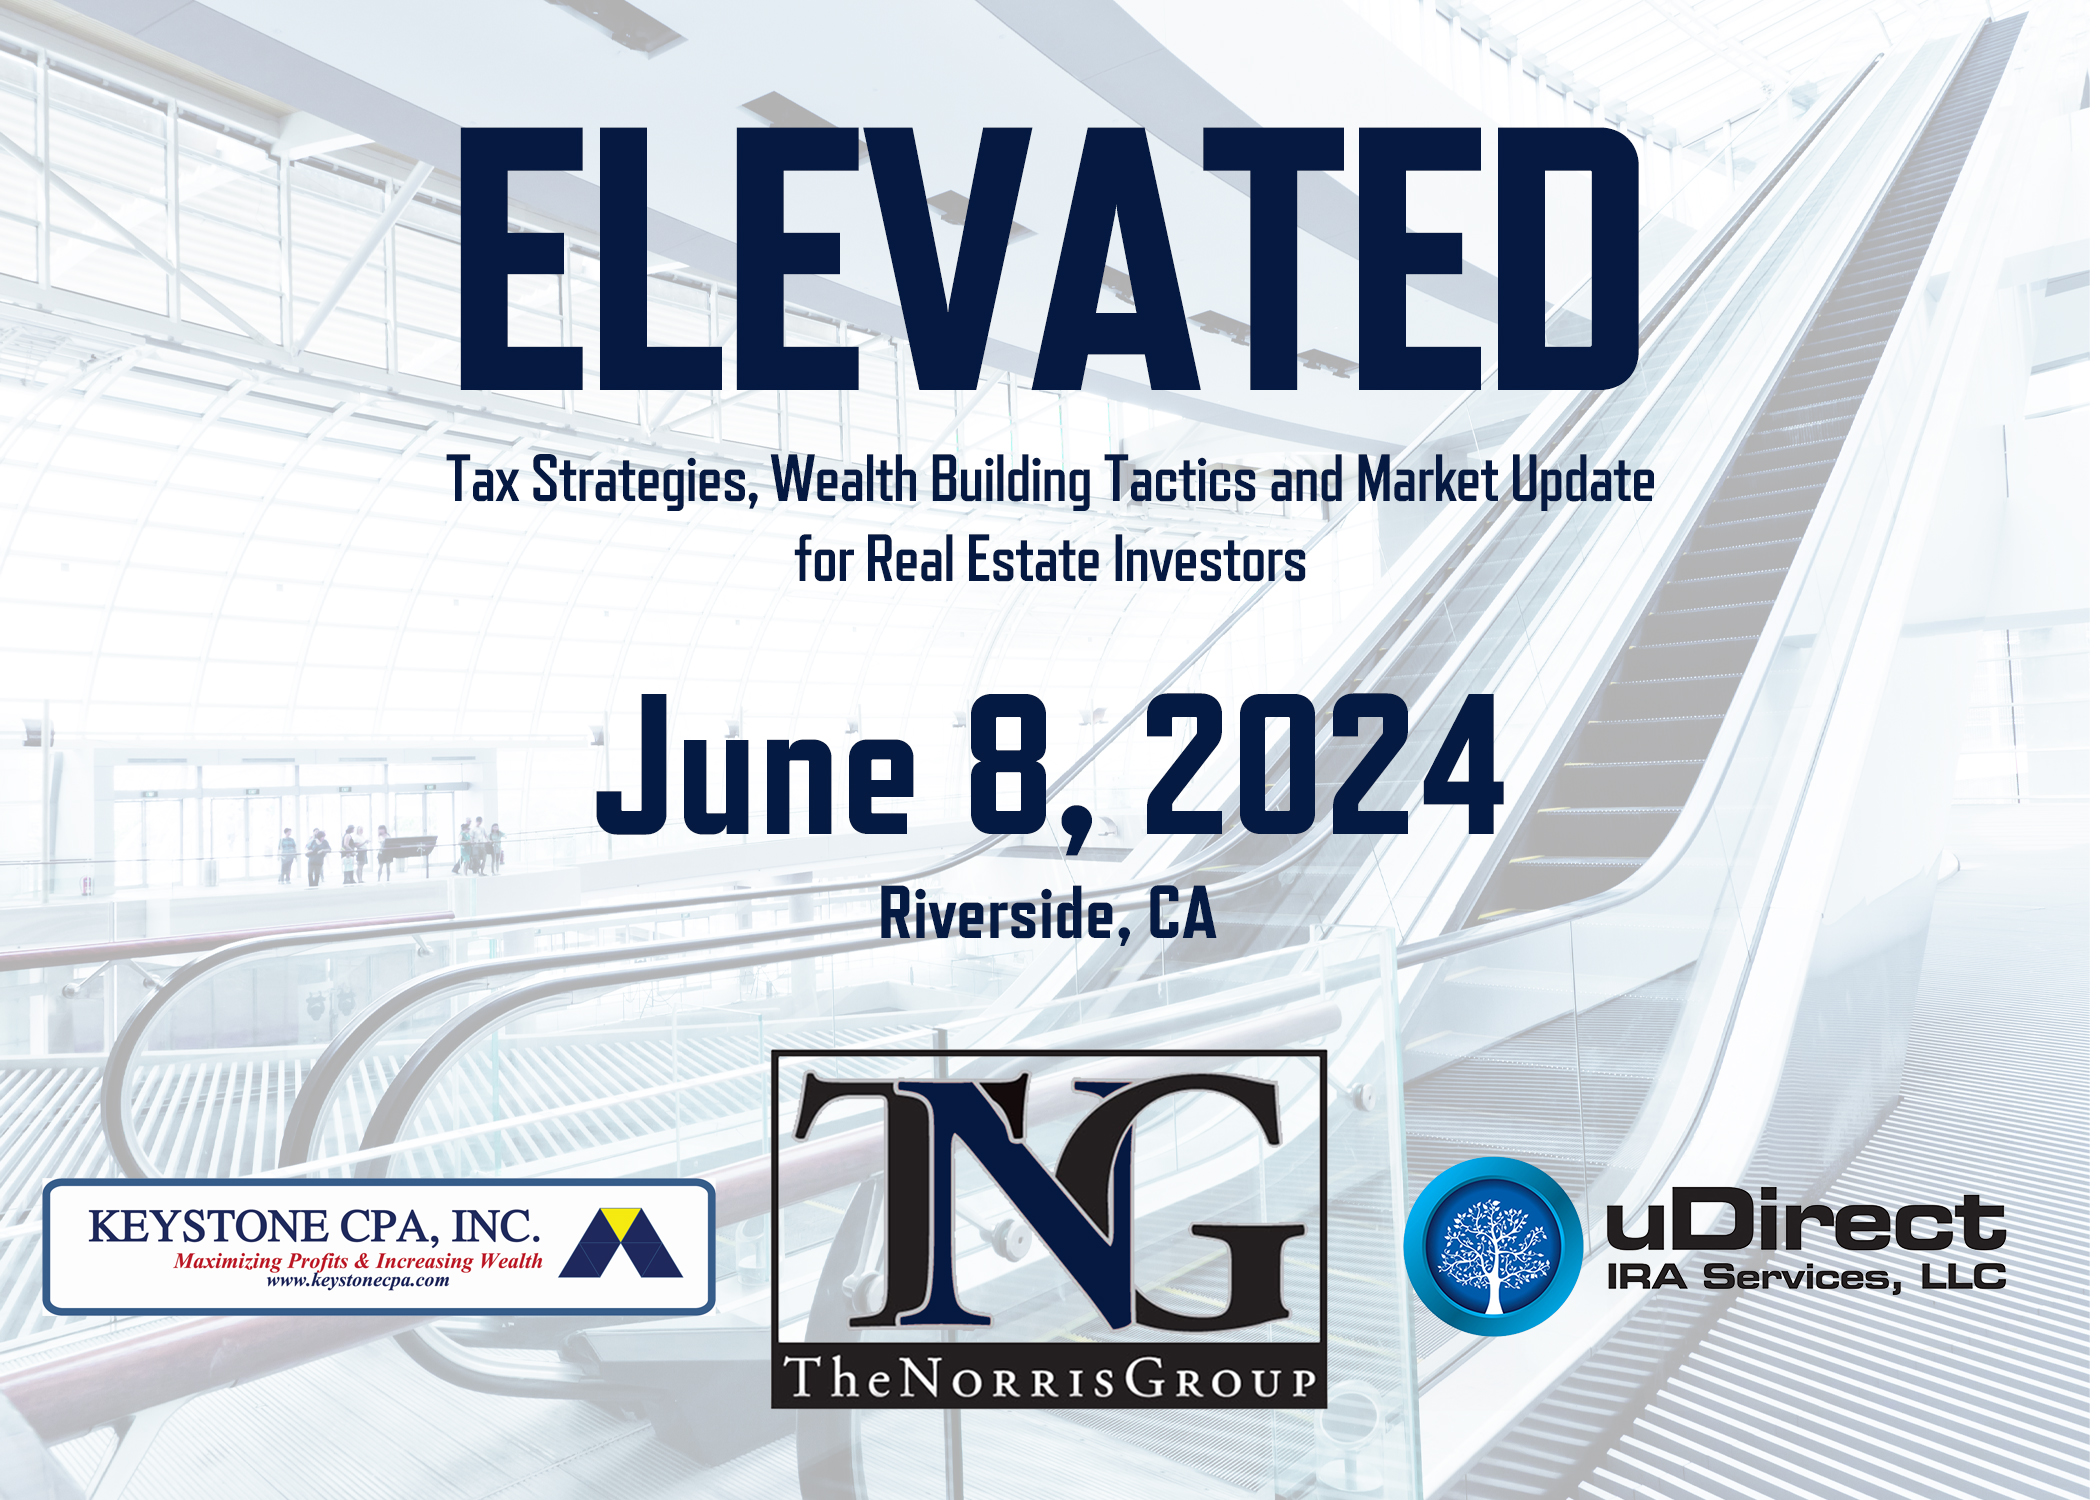 ELEVATED- Tax Strategies, Wealth Building Tactics and Market Update/Forecast